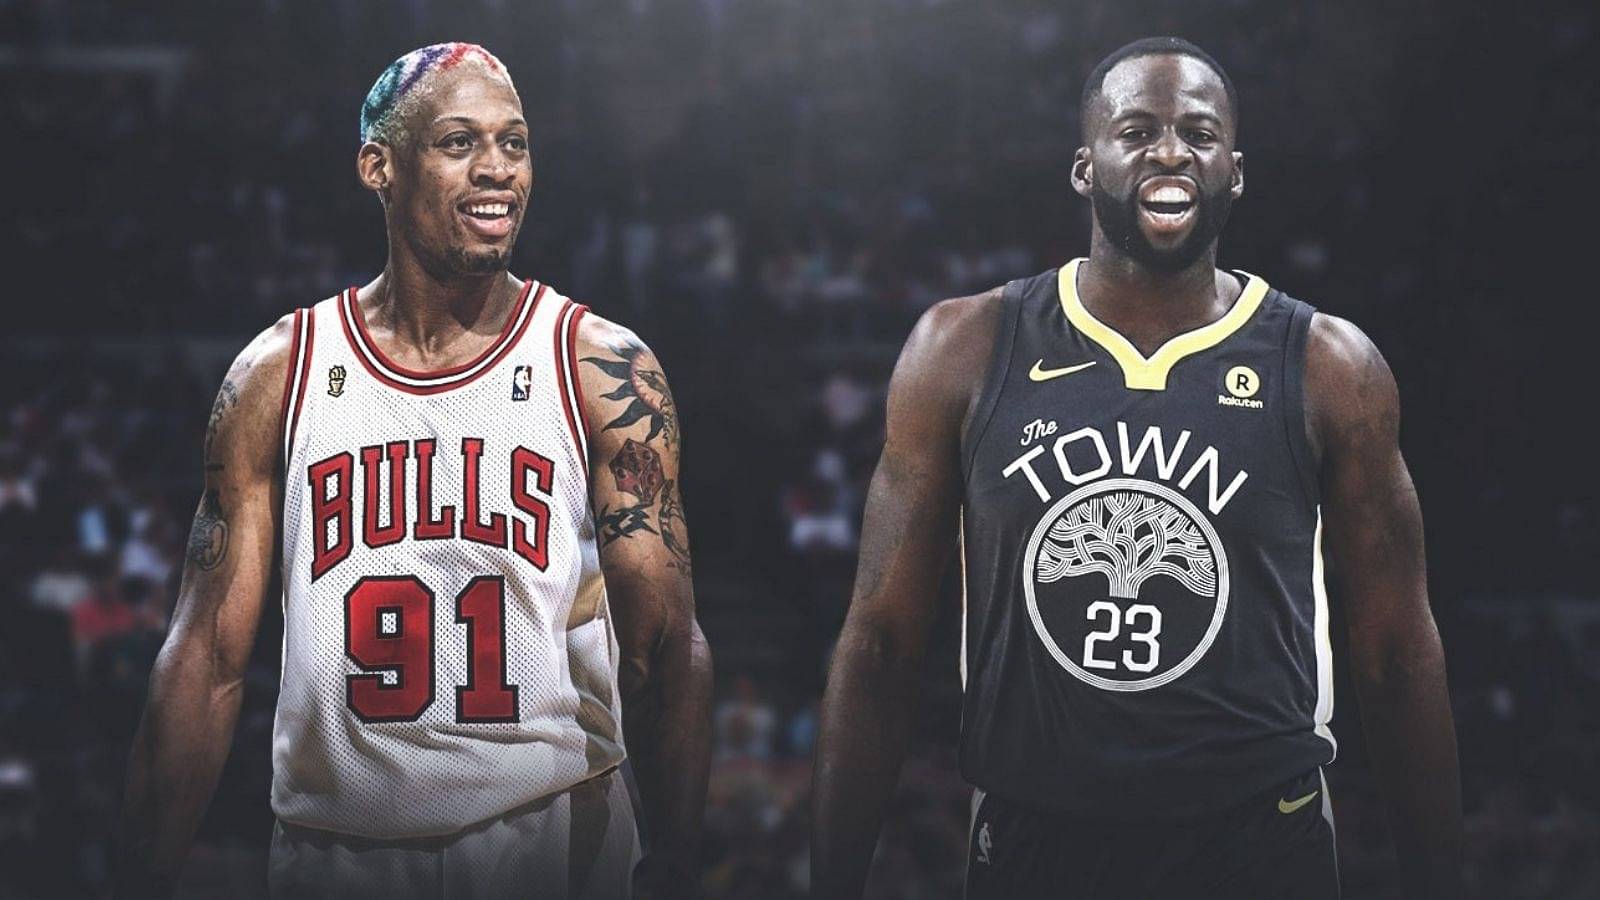 "Dennis Rodman vs Draymond Green would have 9 pts, 40000 rebounds, 400,000 techs": Kevin Durant and fans mock BR's hypothetical 1v1 between the two most impactful players of all time